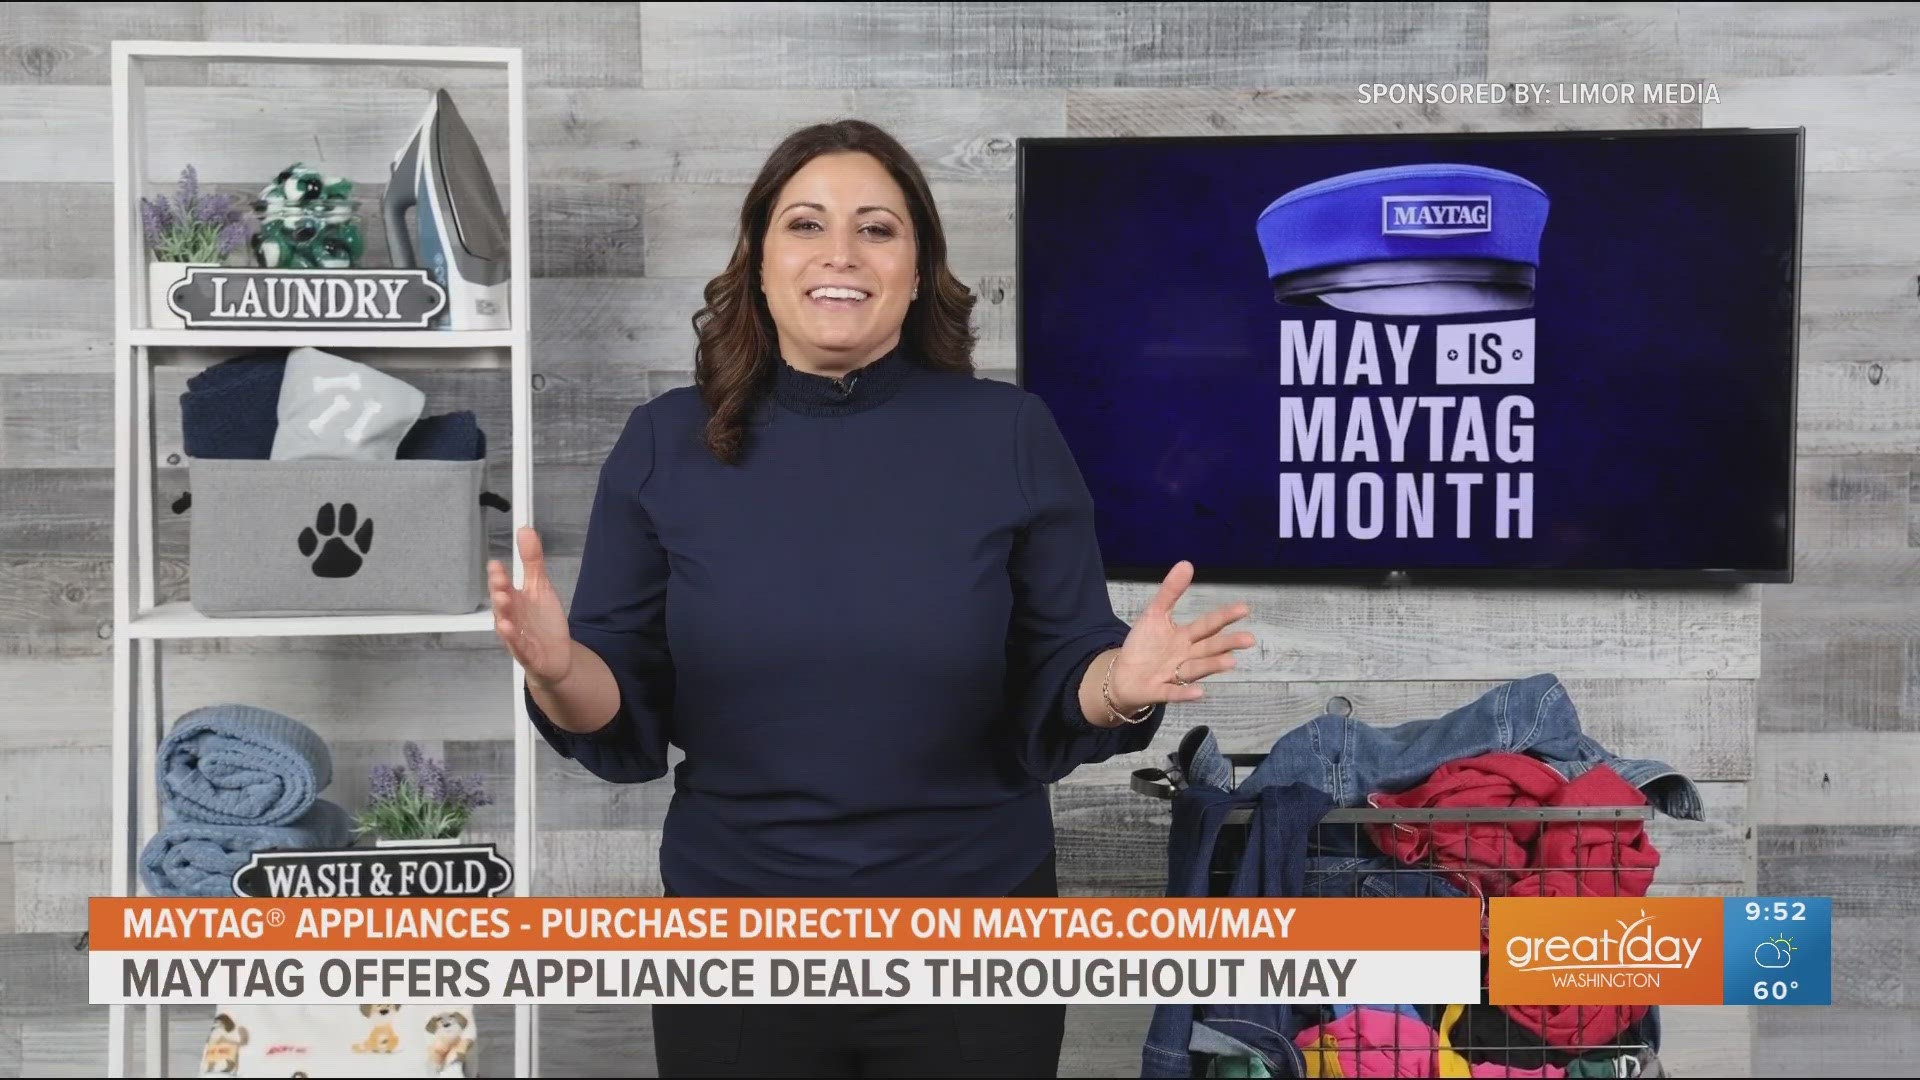 Sponsored by Limor Media. May is Maytag Month! Shoppers can save up to 30% on all Maytag® major appliances, visit Maytag.com/May or participating retailers for more.